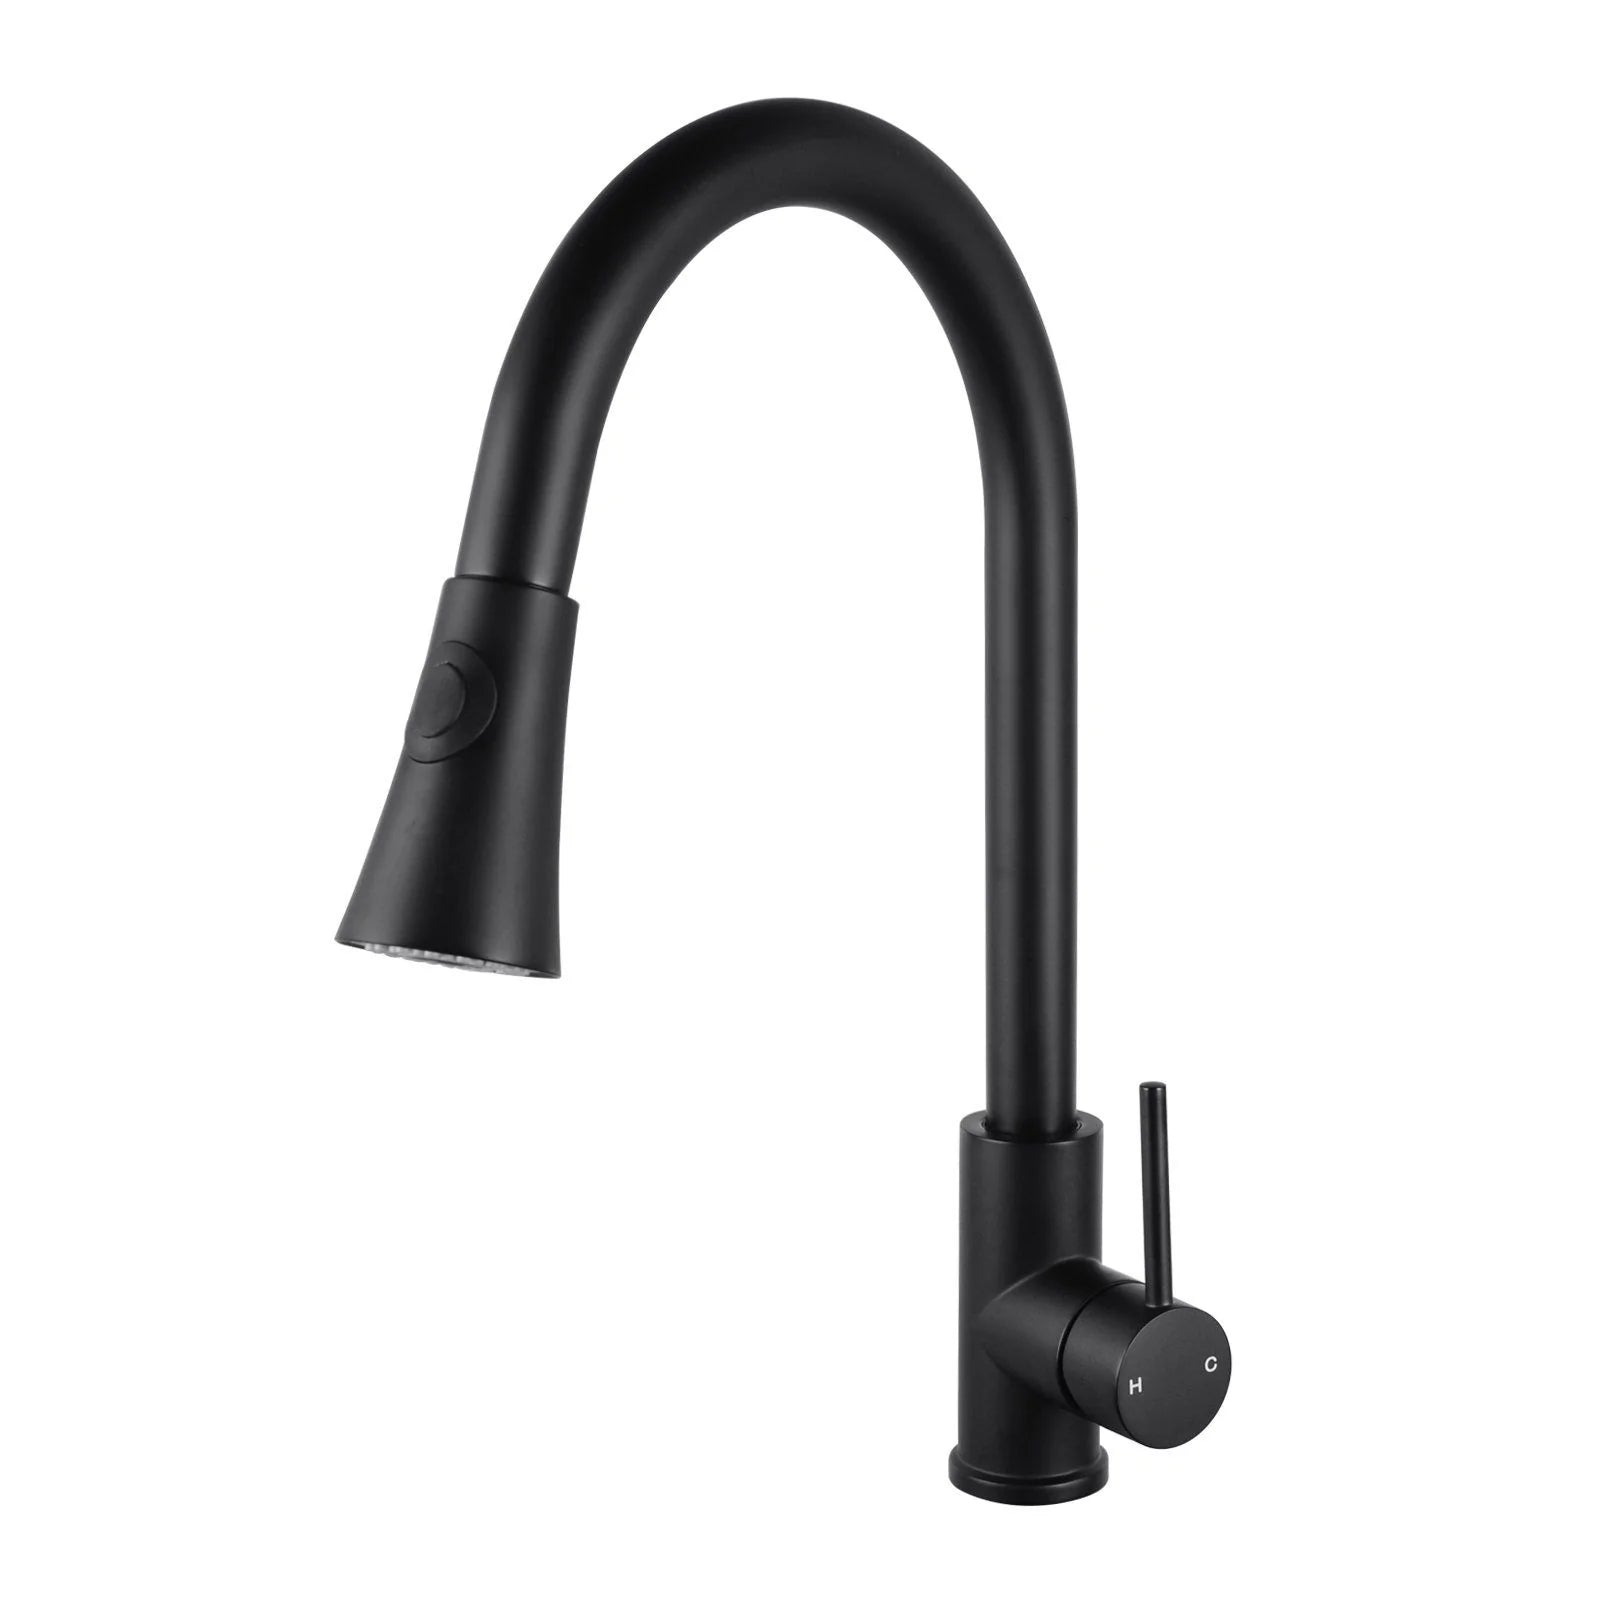 Circular kitchen sink mixer tap with retractable nozzle for versatile use-OX1023.KM